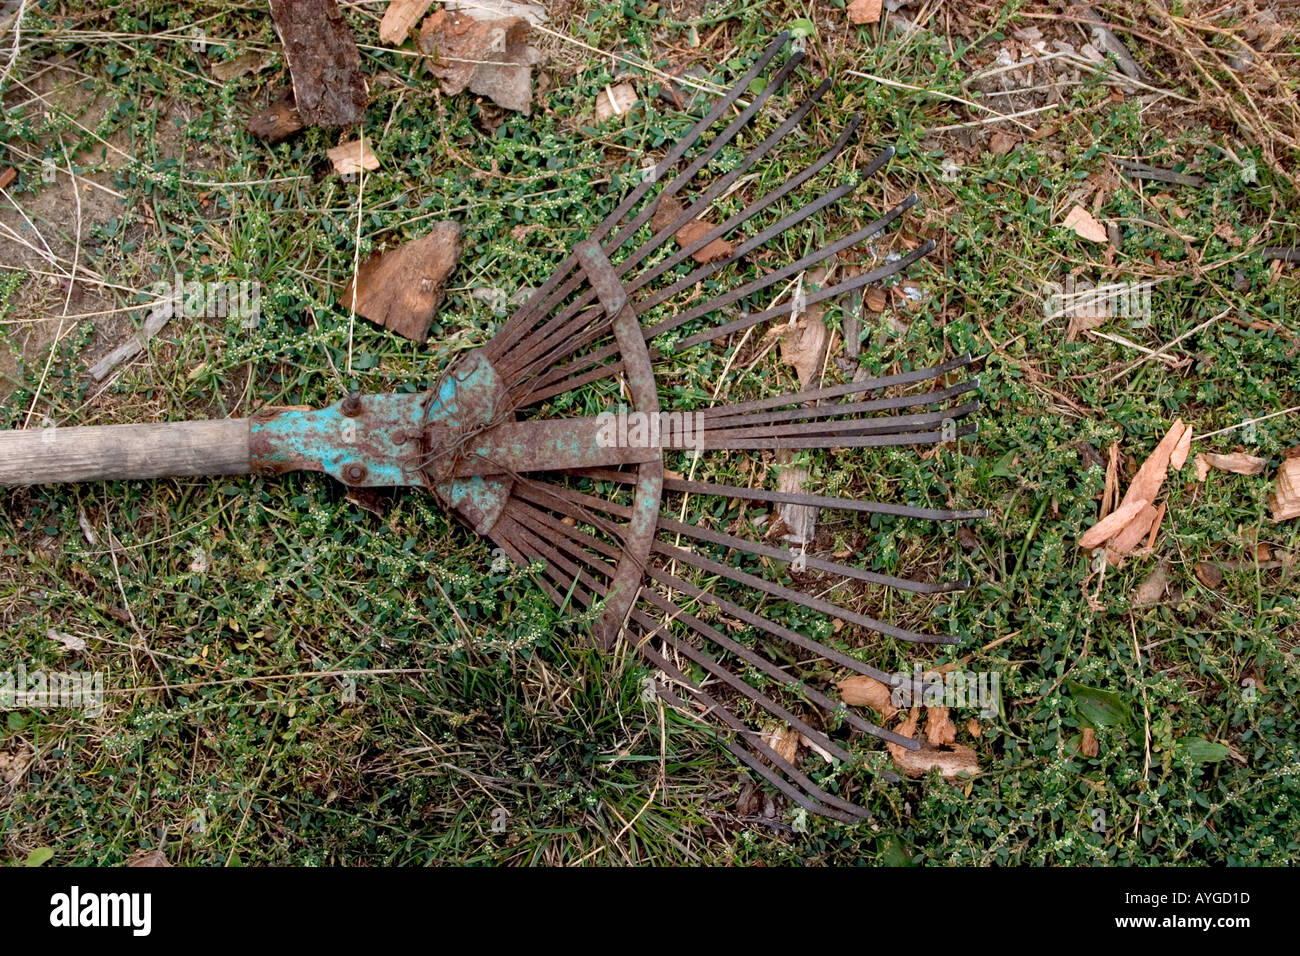 Abandoned rusted rake lying in the grass with a gap between the long fingers. Rawa Mazowiecka Poland Stock Photo